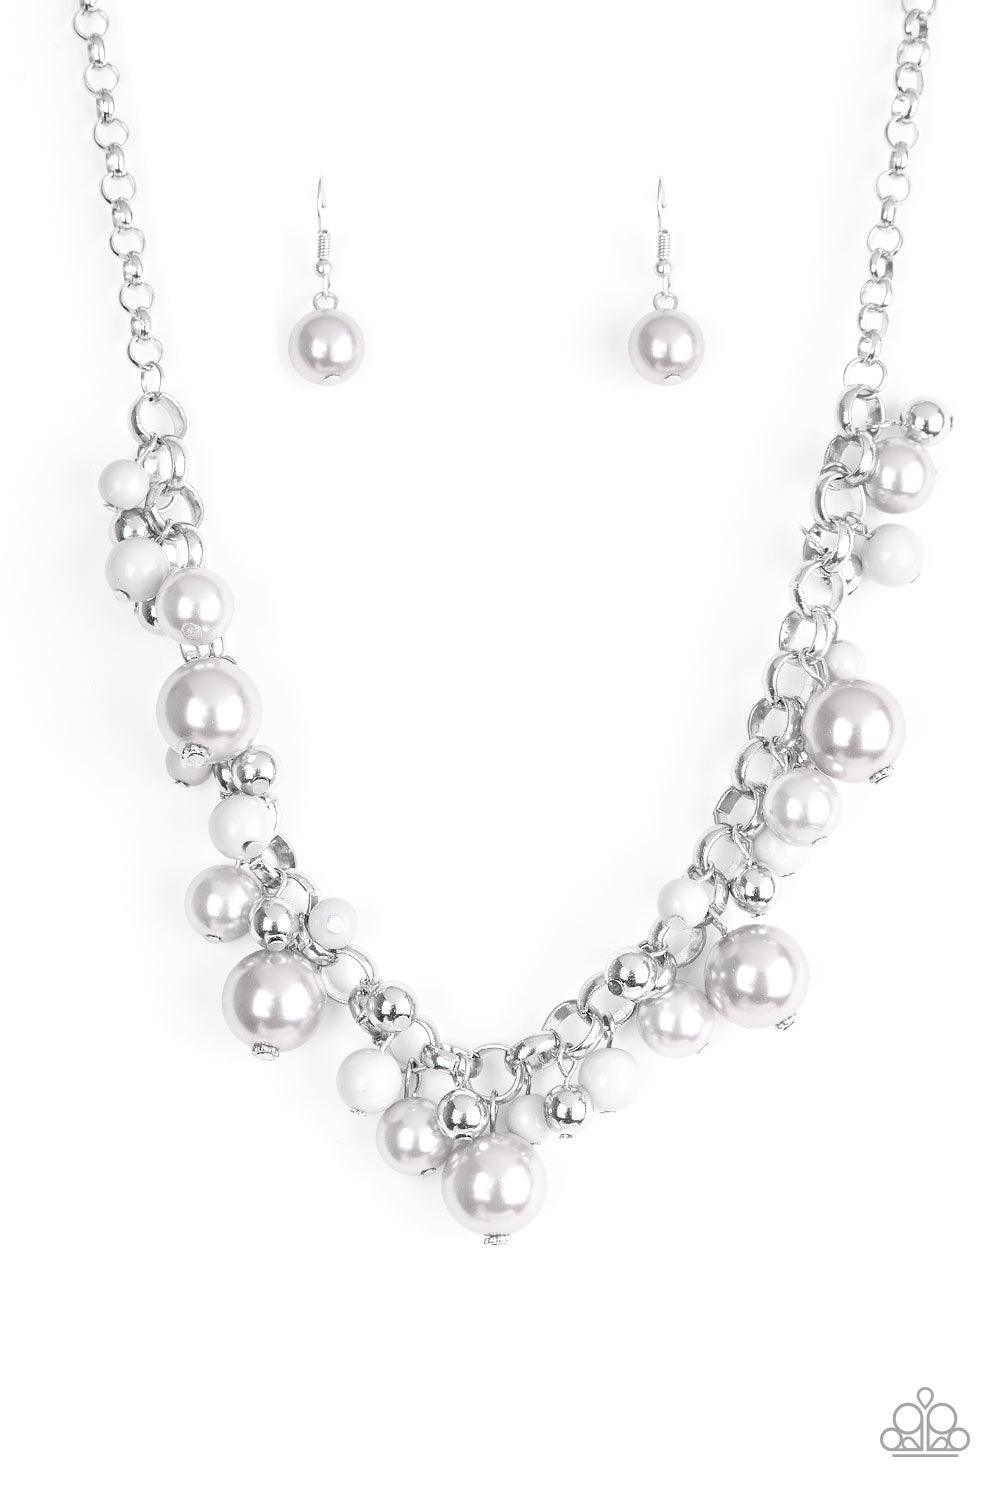 Paparazzi Accessories The Upstater - Silver Varying in size, bubbly silver pearls, classic silver beads, and shiny gray beads swing from the bottom of a glistening silver chain, creating a refined fringe below the collar. Features an adjustable clasp clos